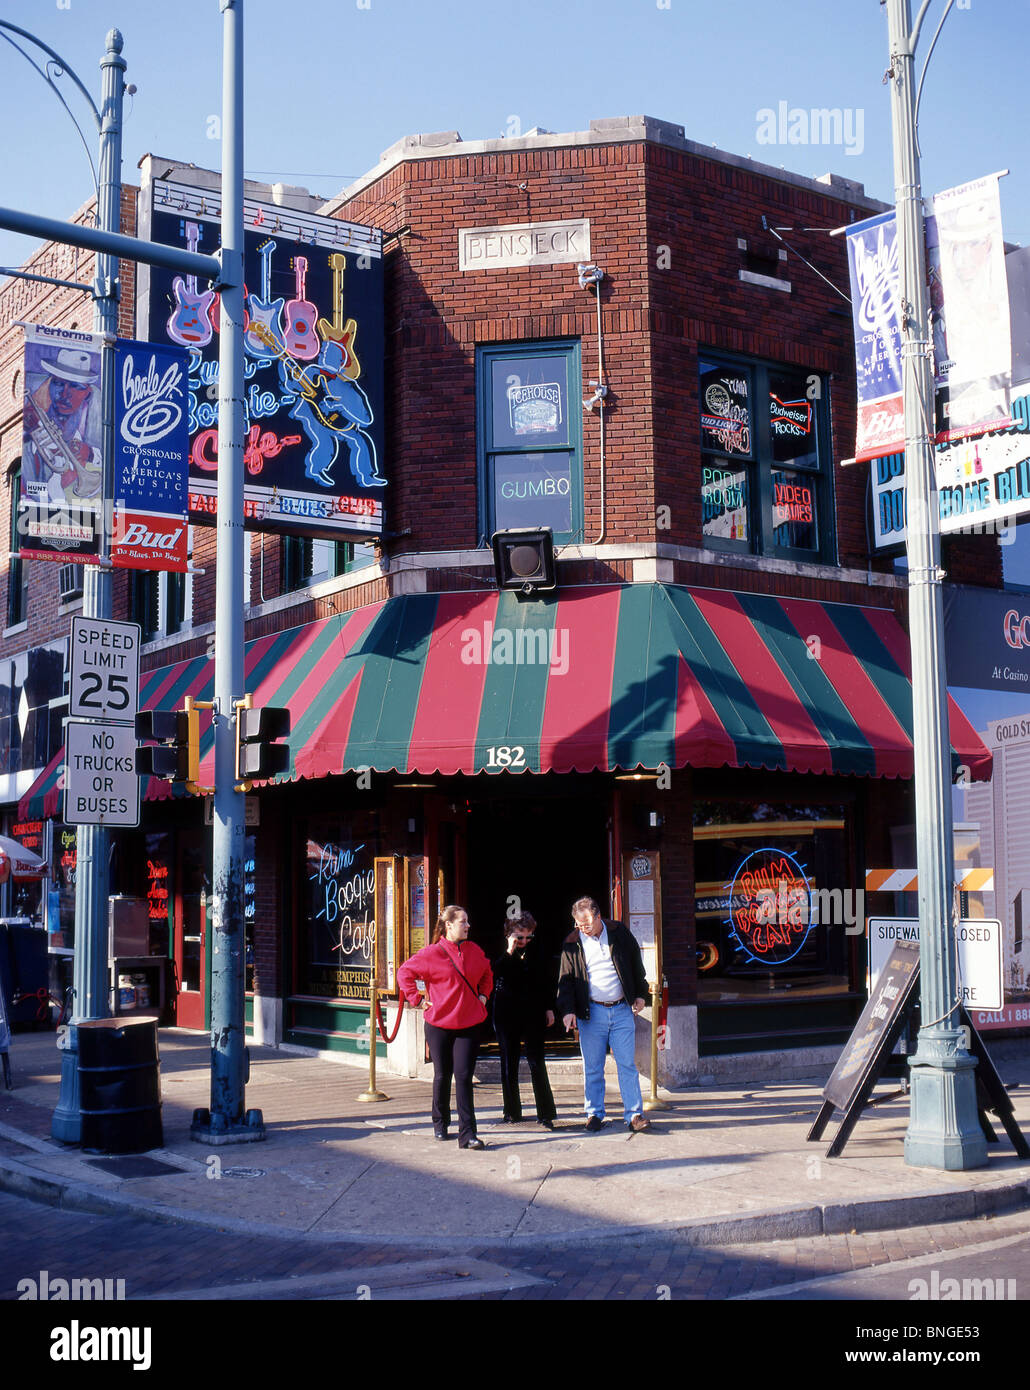 Blues bars, Beale Street, Beale Street District, Memphis, Tennessee, United States of America Stock Photo